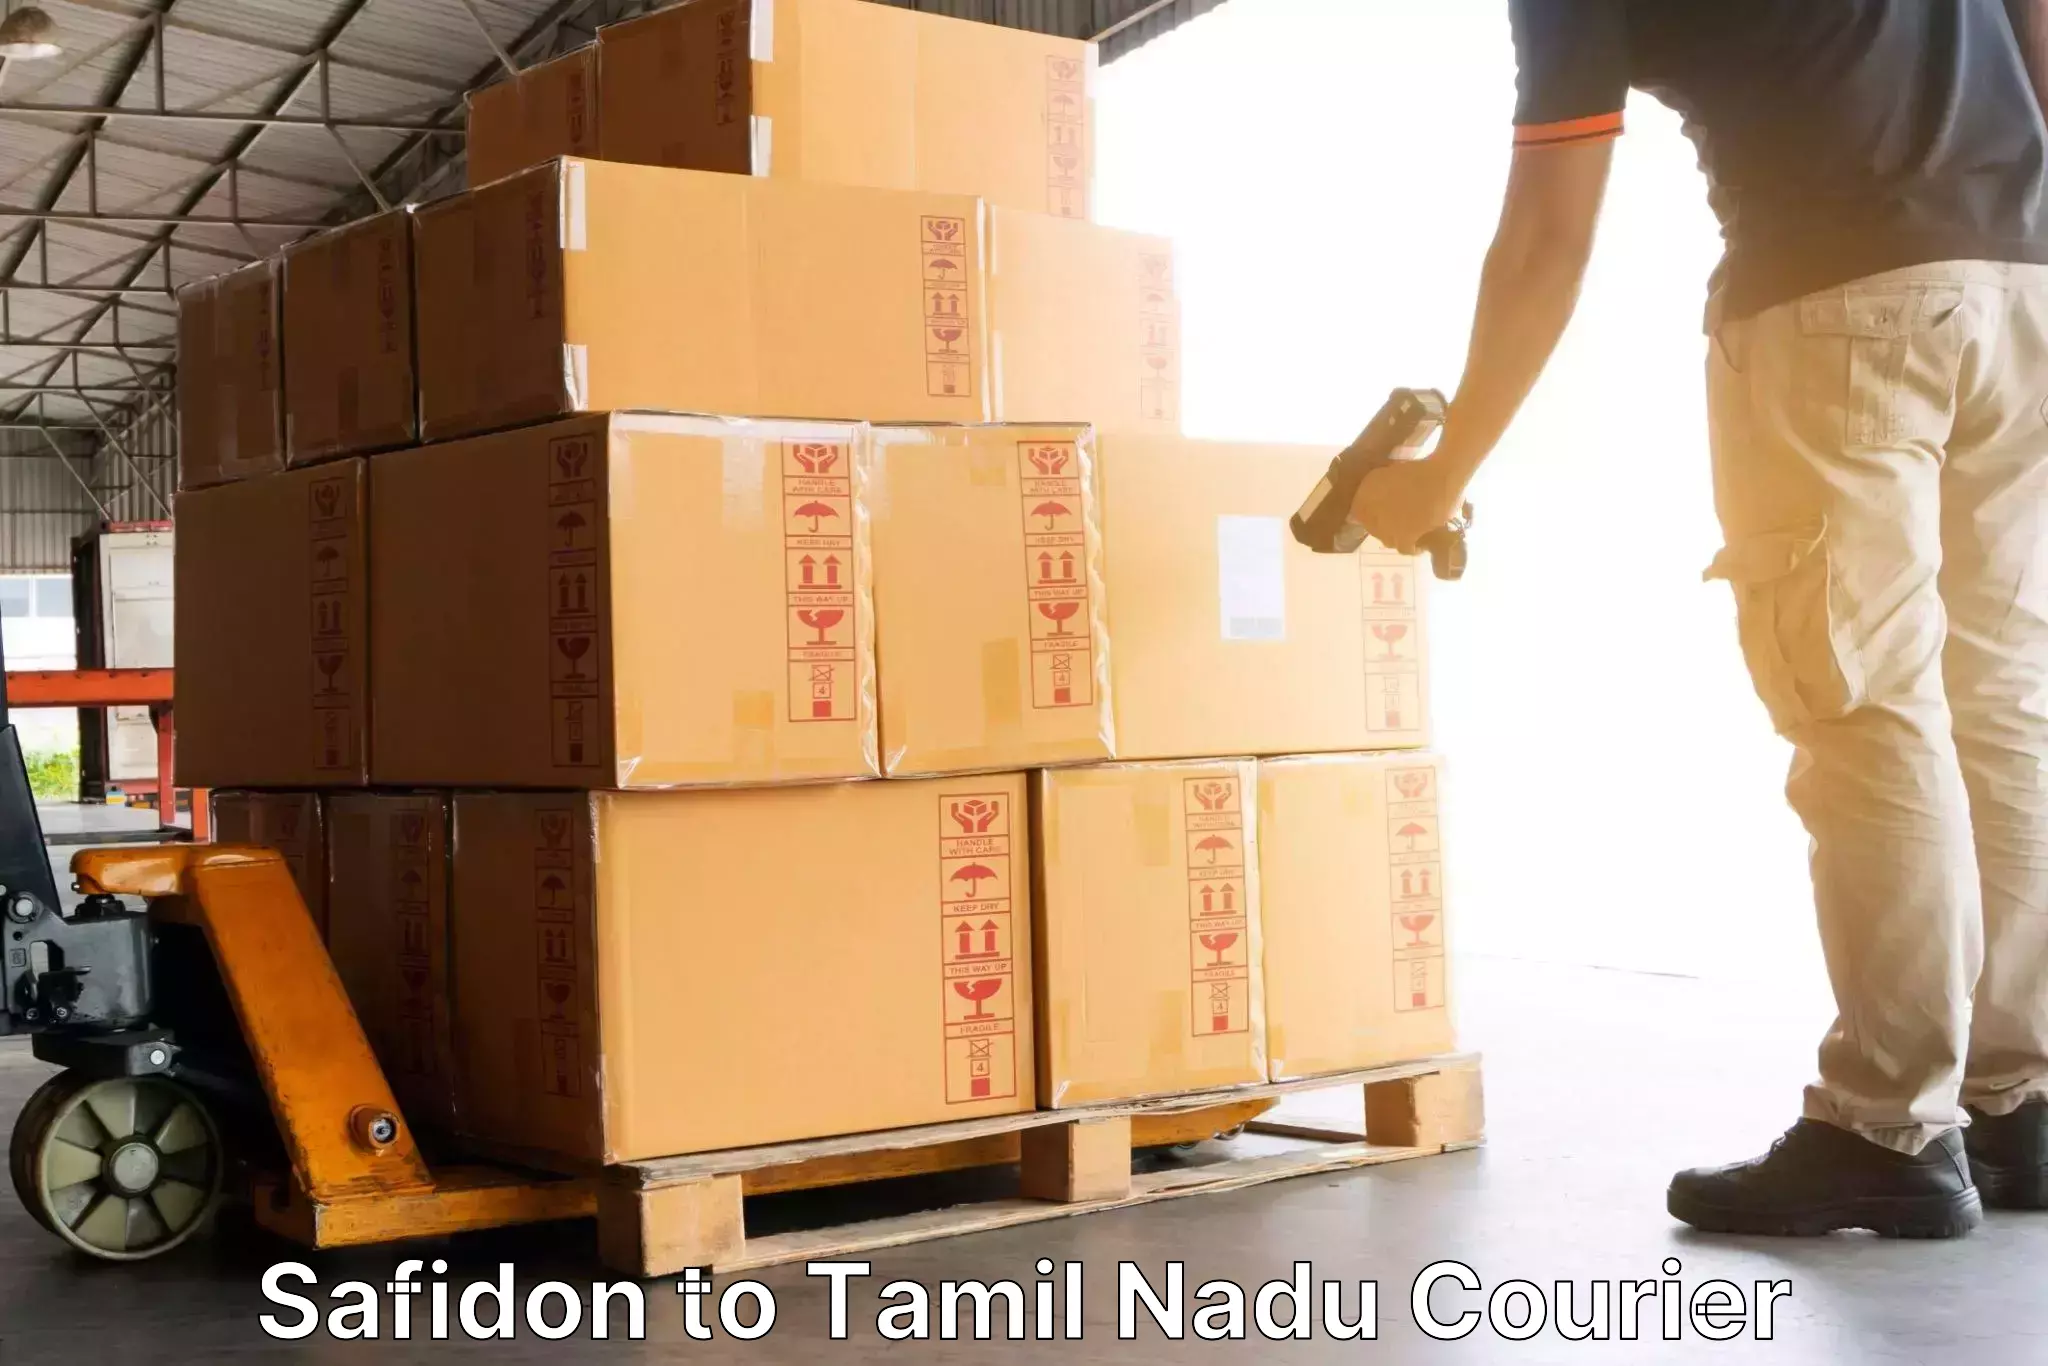 Express package delivery Safidon to Gobichettipalayam